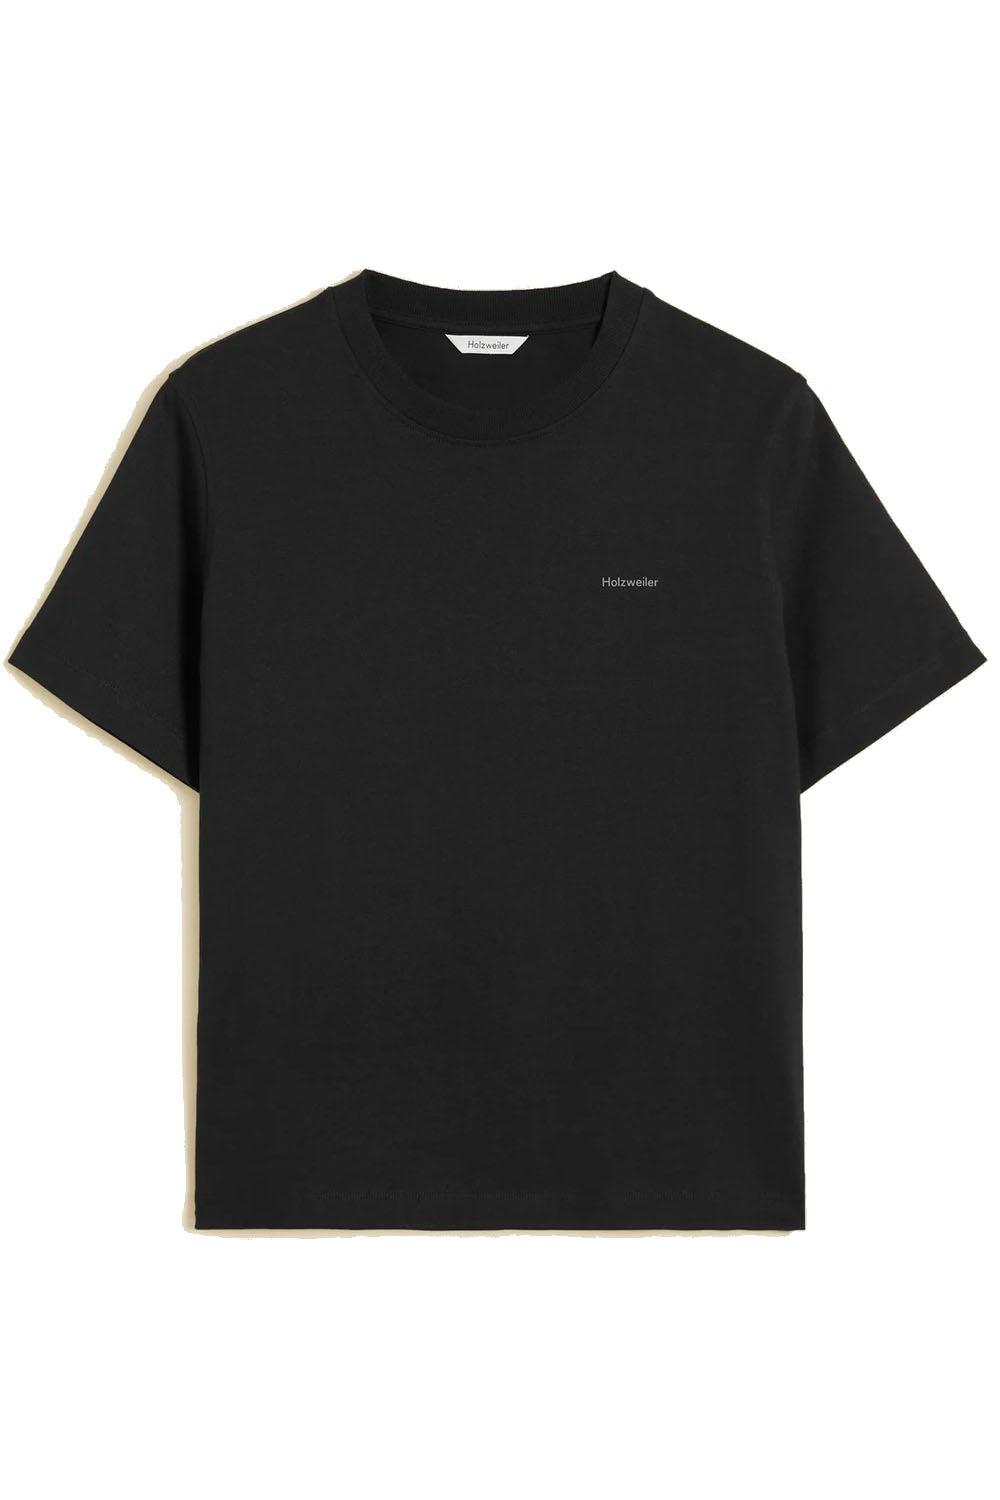 W. Relaxed Tee Black